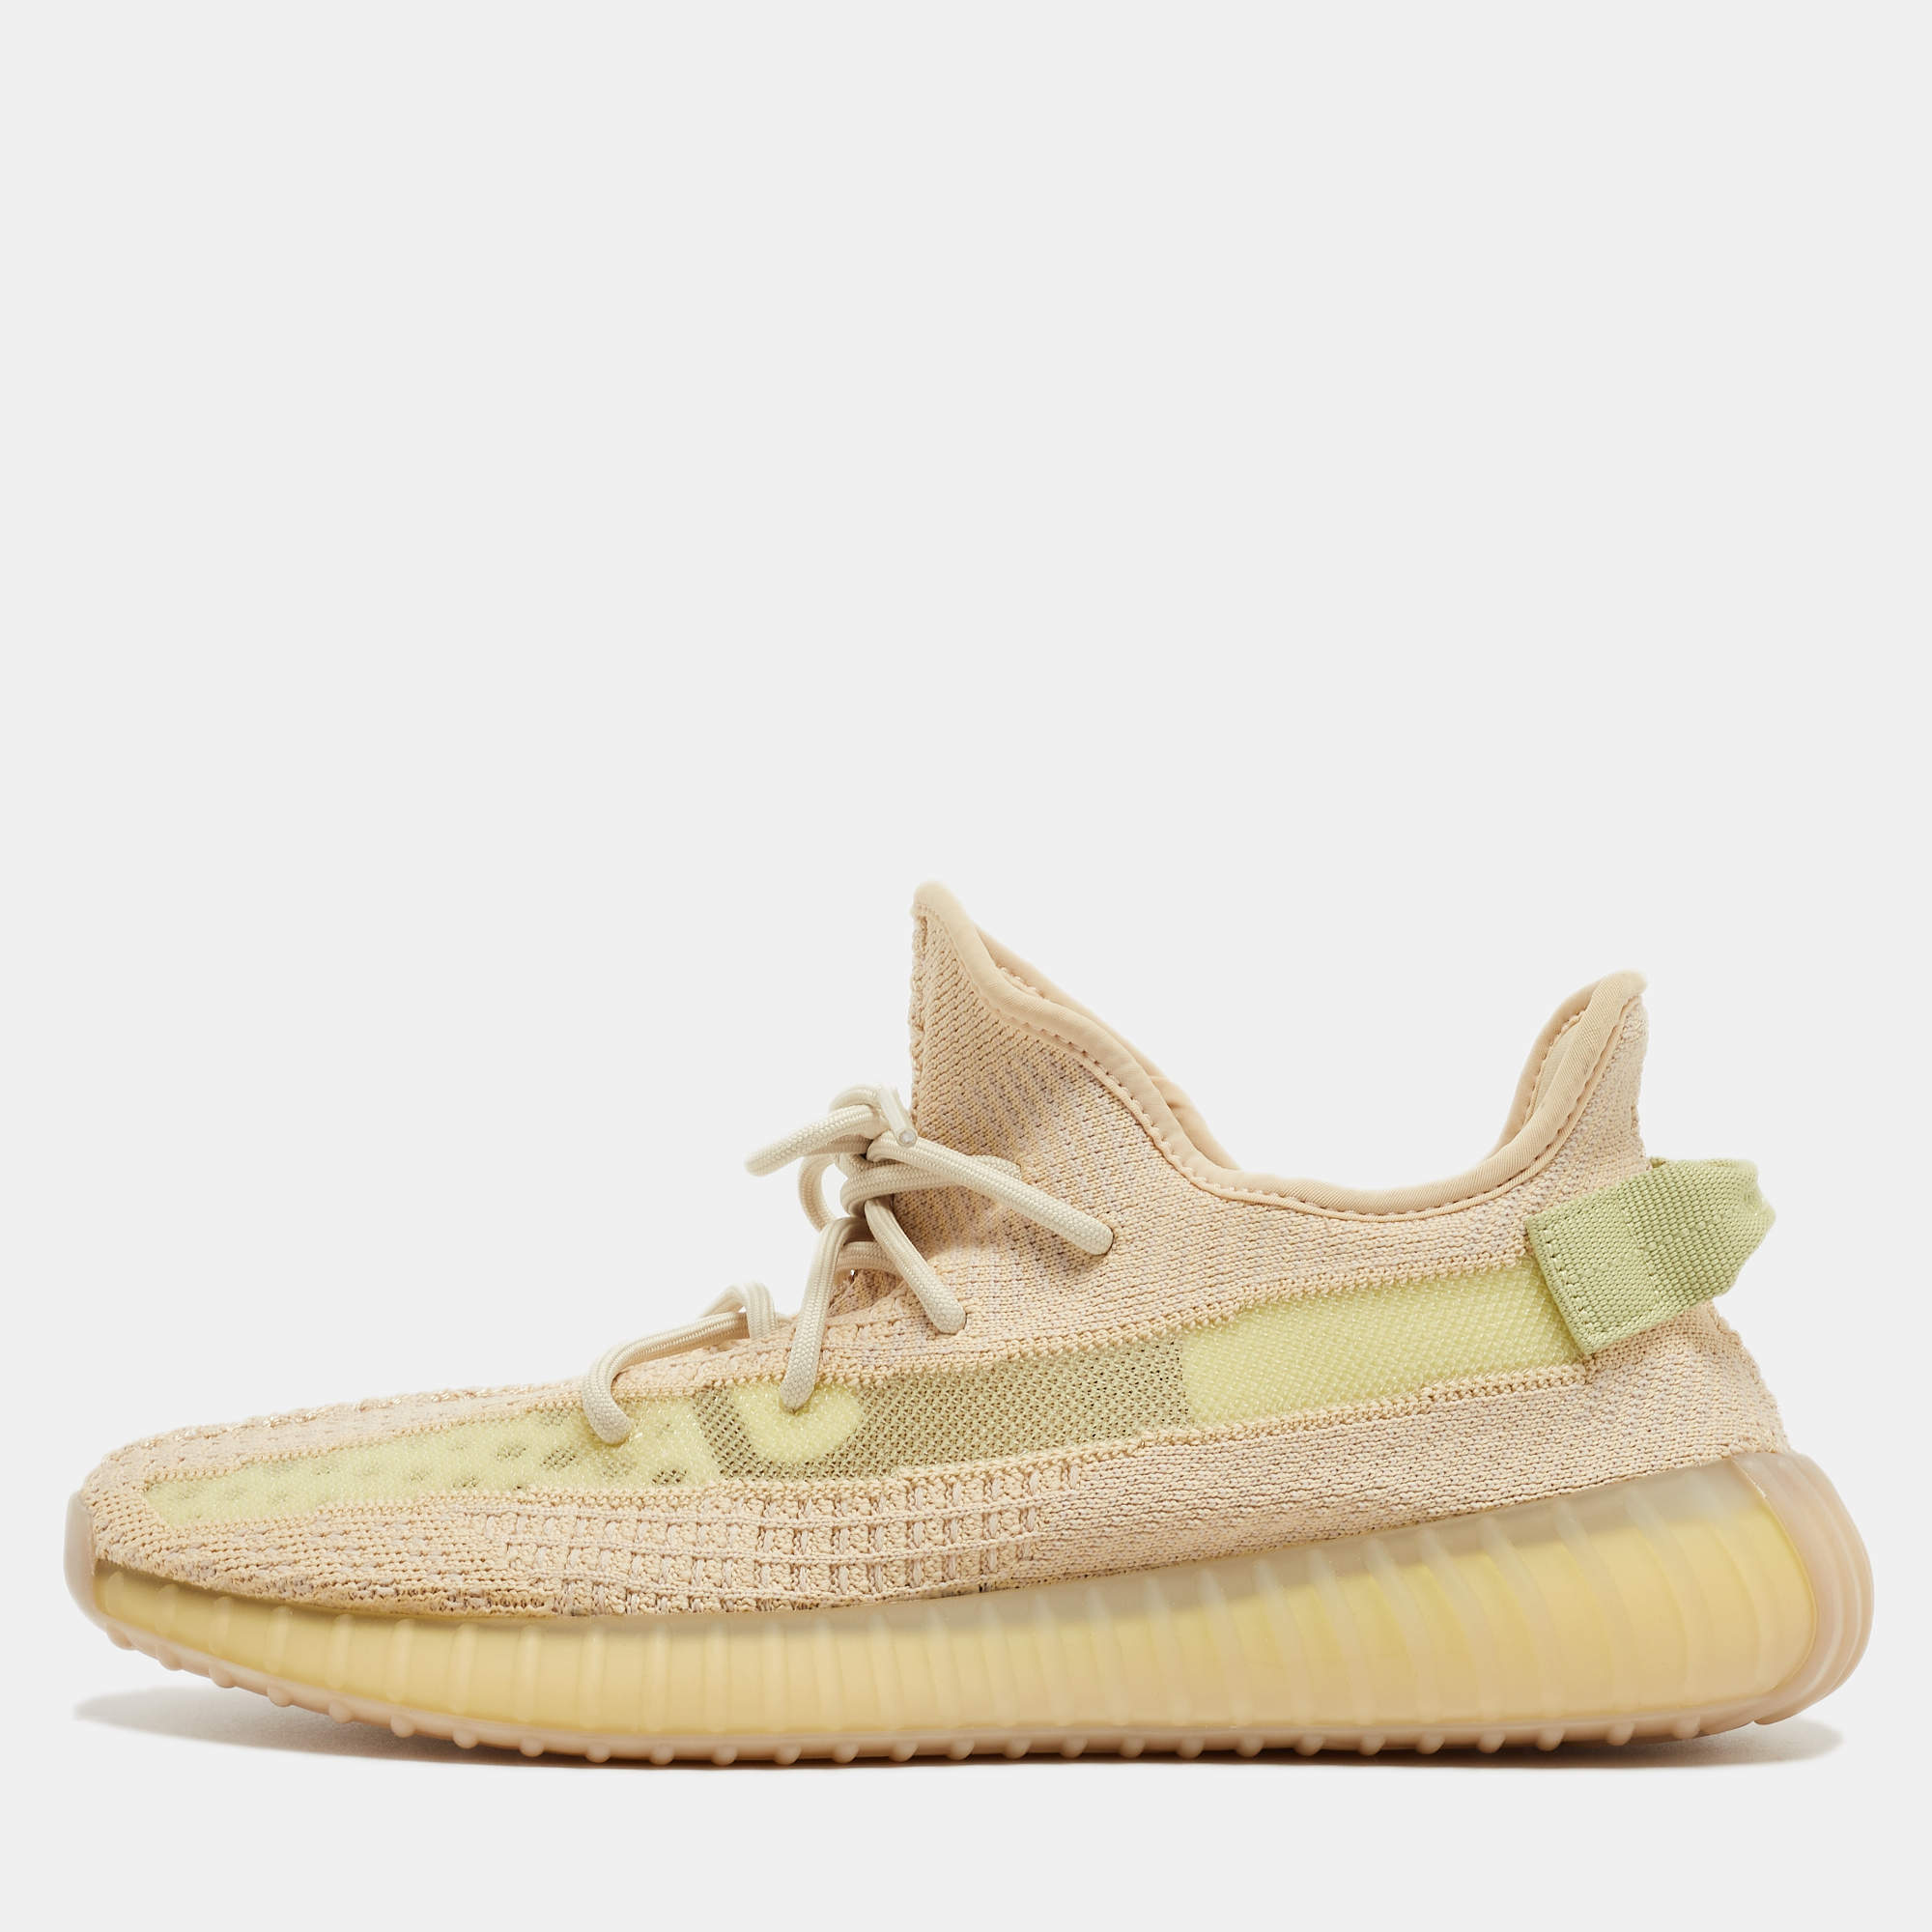 Yeezy x Adidas Beige Knit Boost 350 V2 Sneakers Size 44